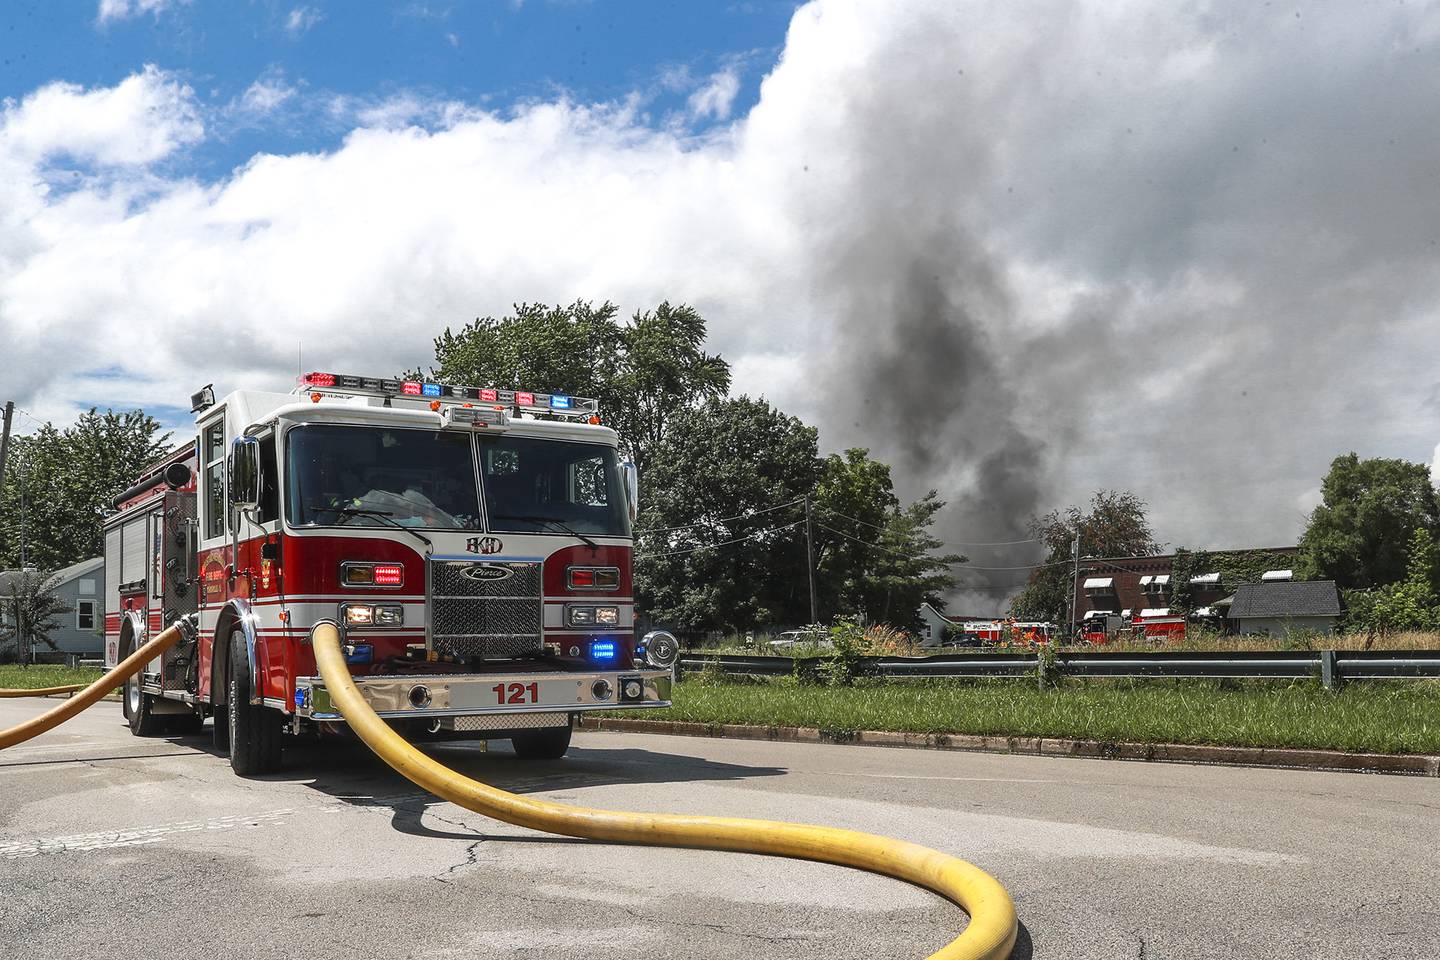 A firetruck pumps water from a nearby hydrant to fight the blaze on Tuesday, June 29, 2021, at the 900 block of East Benton Street in Morris, Ill. Over 40 homes in the area have been evacuated after an industrial building caught fire late Tuesday morning.